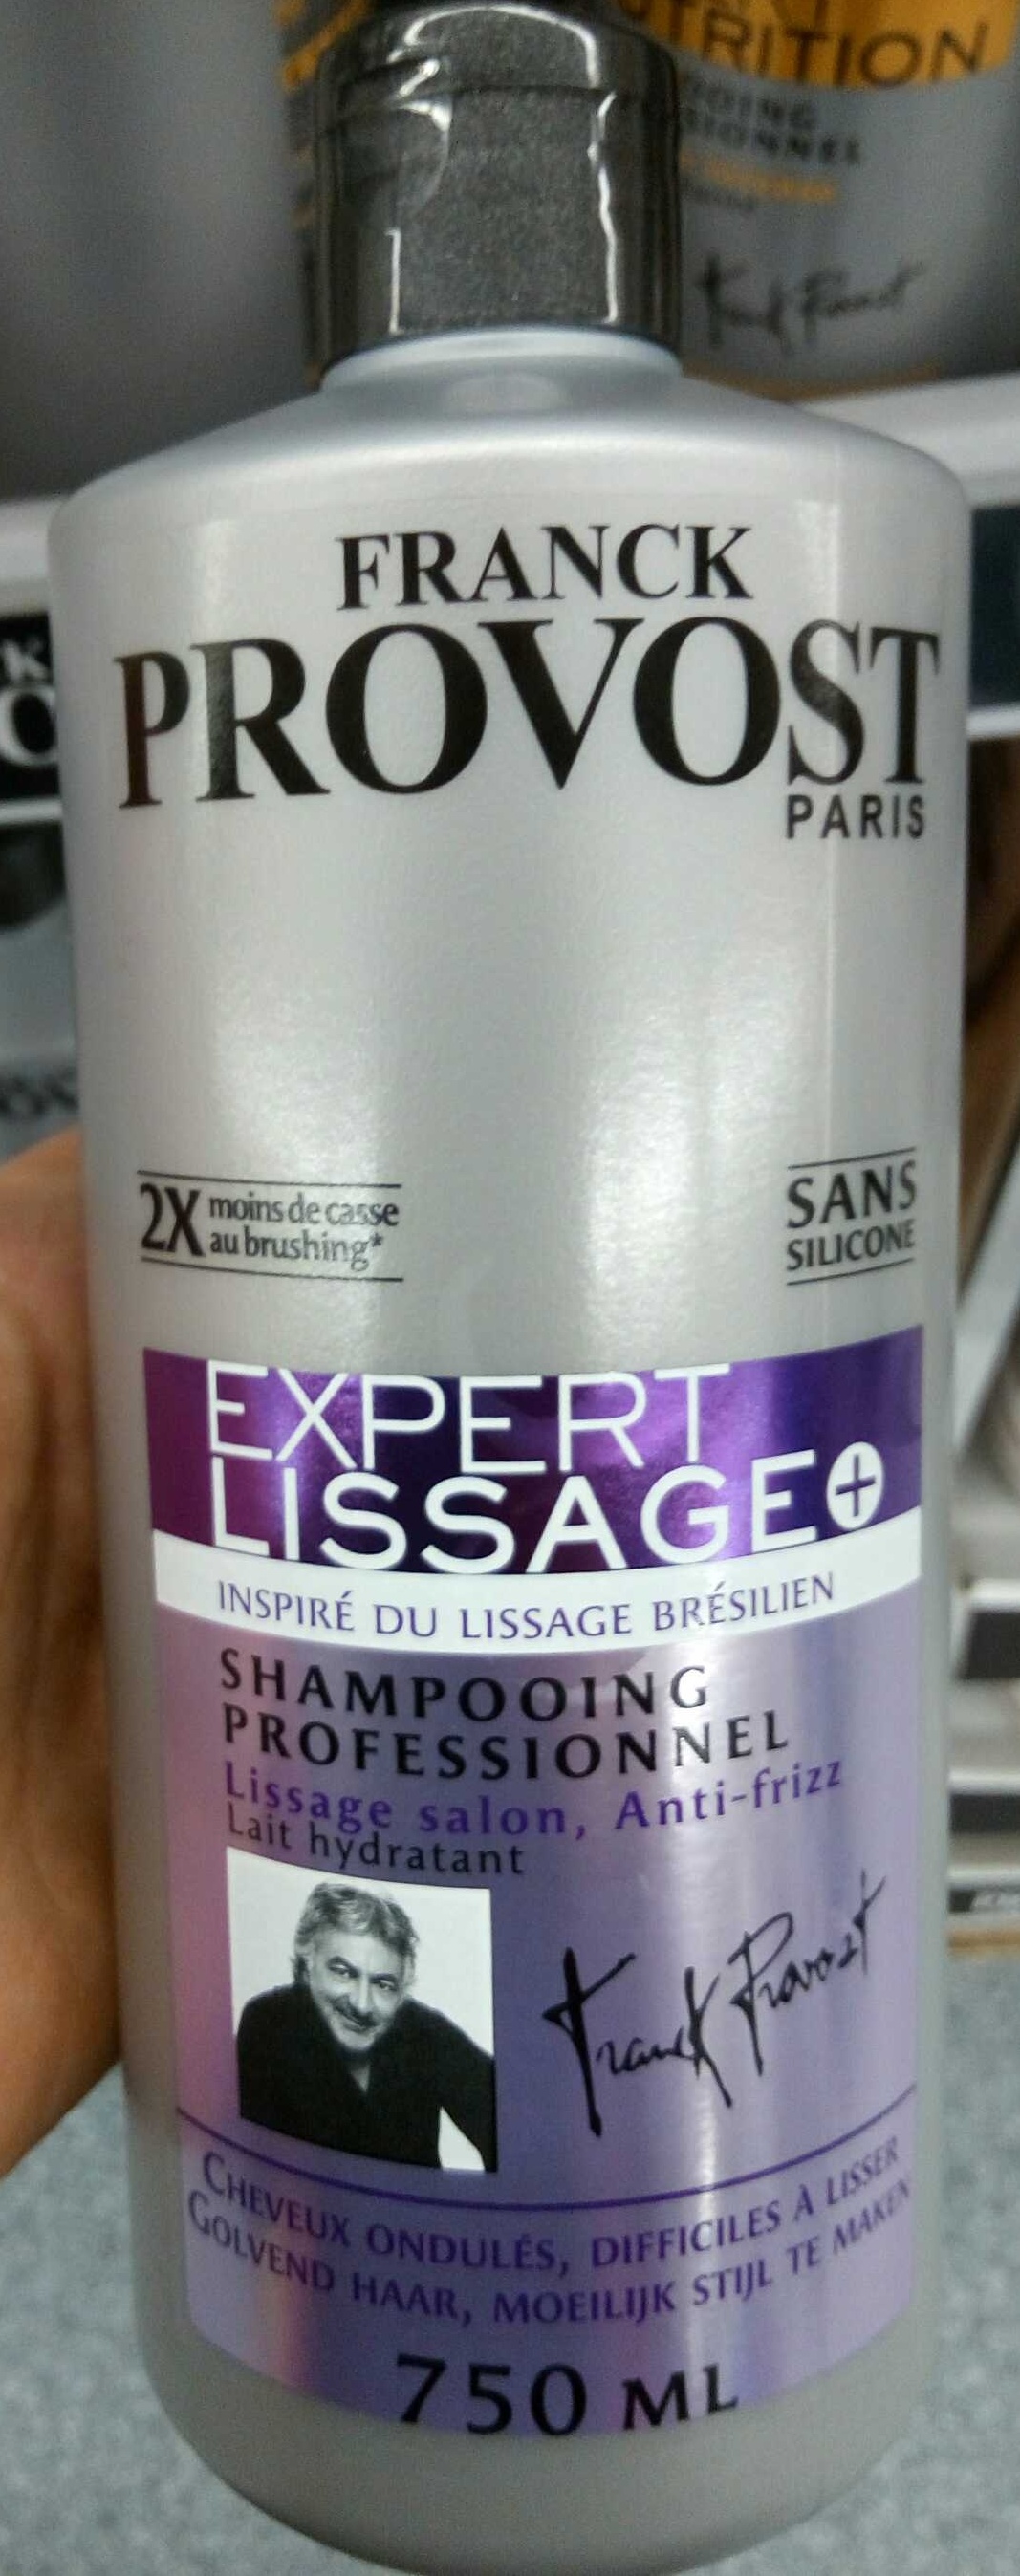 Expert lissage+ shampooing professionnel - Product - fr